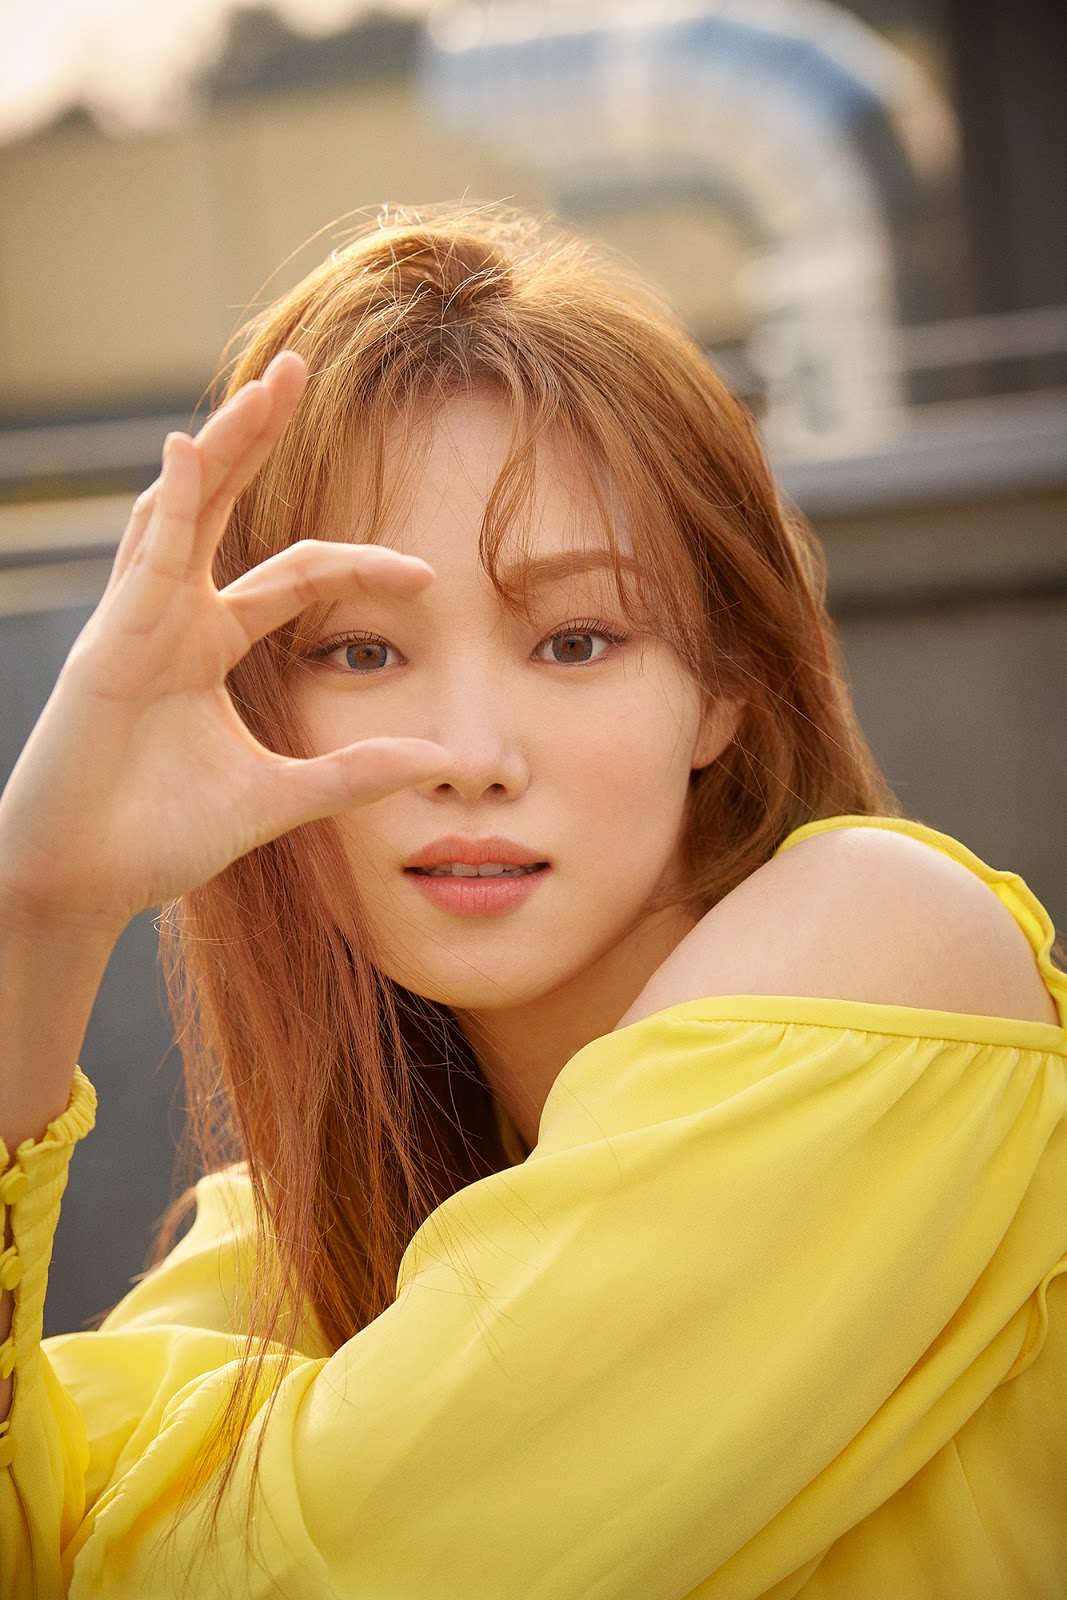 agencygarten: 2019 APRIL HIGHCUT X ALCON 'LEE SUNG KYUNG' HAIRSTYLING ...